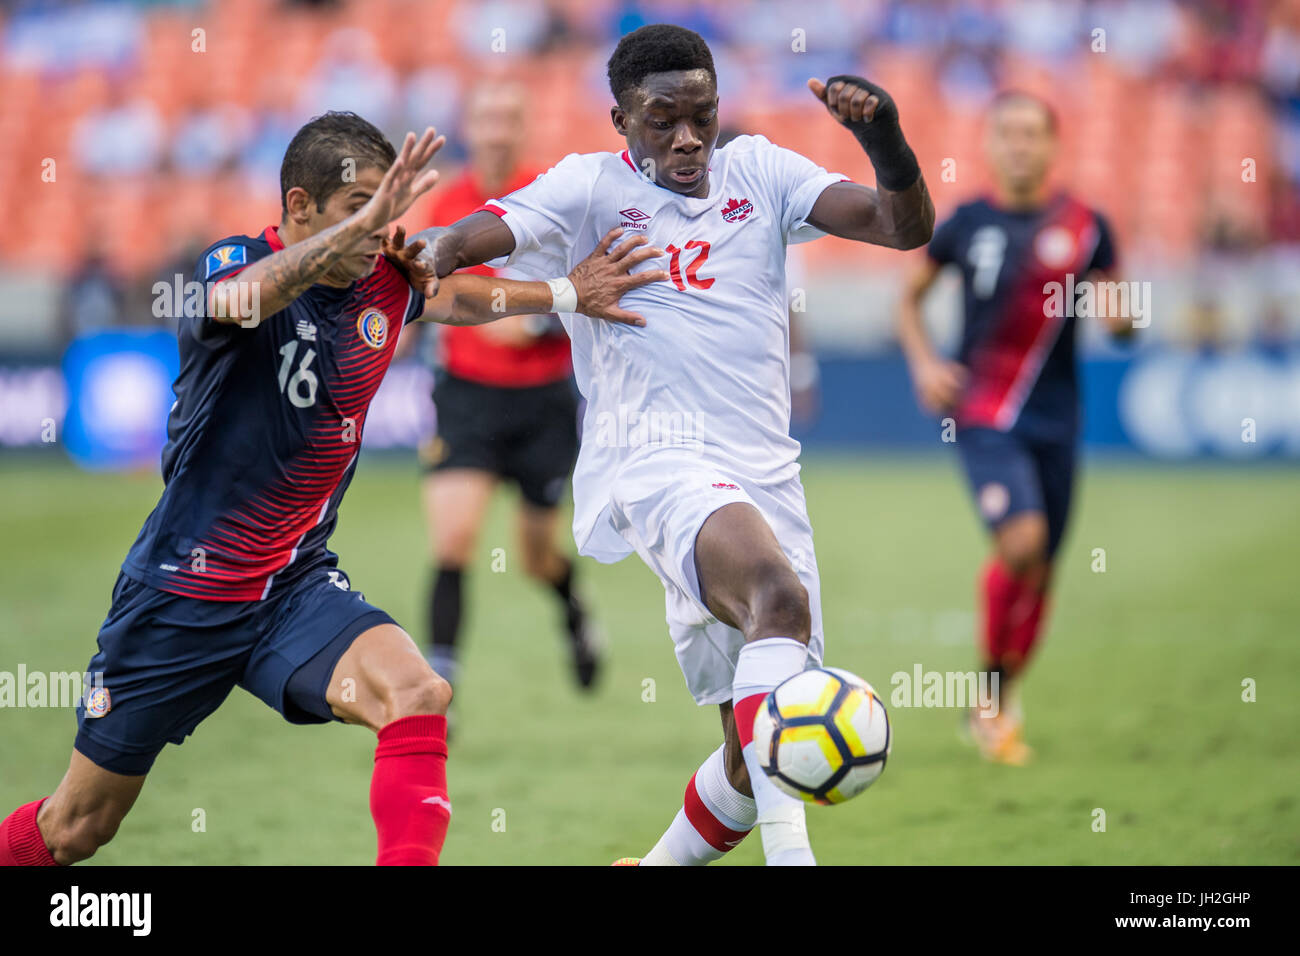 Houston, Texas, USA. 11th July, 2017. Canada midfielder Alphonso Davies (12) and Costa Rica defender Christian Gamboa (16) battle for the ball during the 1st half of an international CONCACAF Gold Cup soccer match between Canada and Costa Rica at BBVA Compass Stadium in Houston, TX on July 11th, 2017. The game ended in a 1-1 draw. Credit: Trask Smith/ZUMA Wire/Alamy Live News Stock Photo